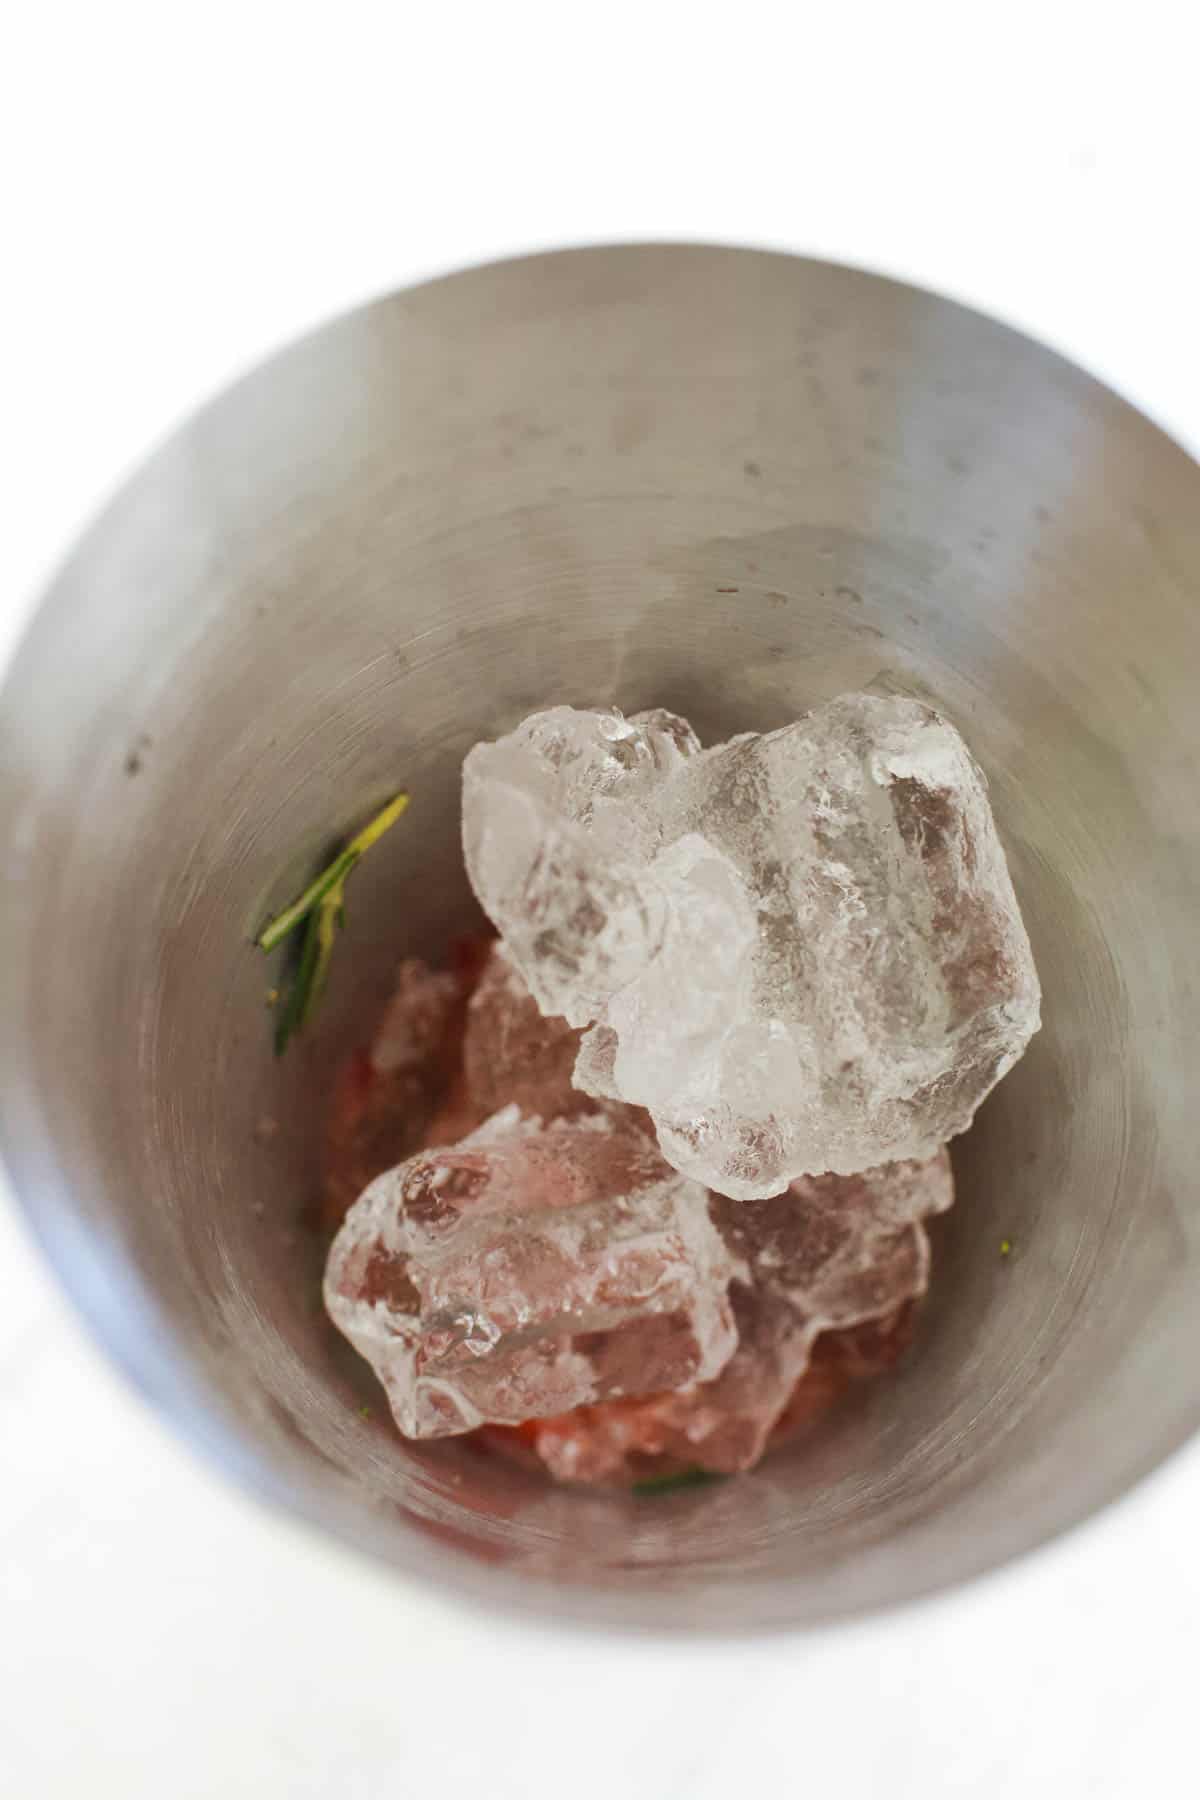 Astainless steel cocktail shaker filled with strawberries, rosemary and ice.